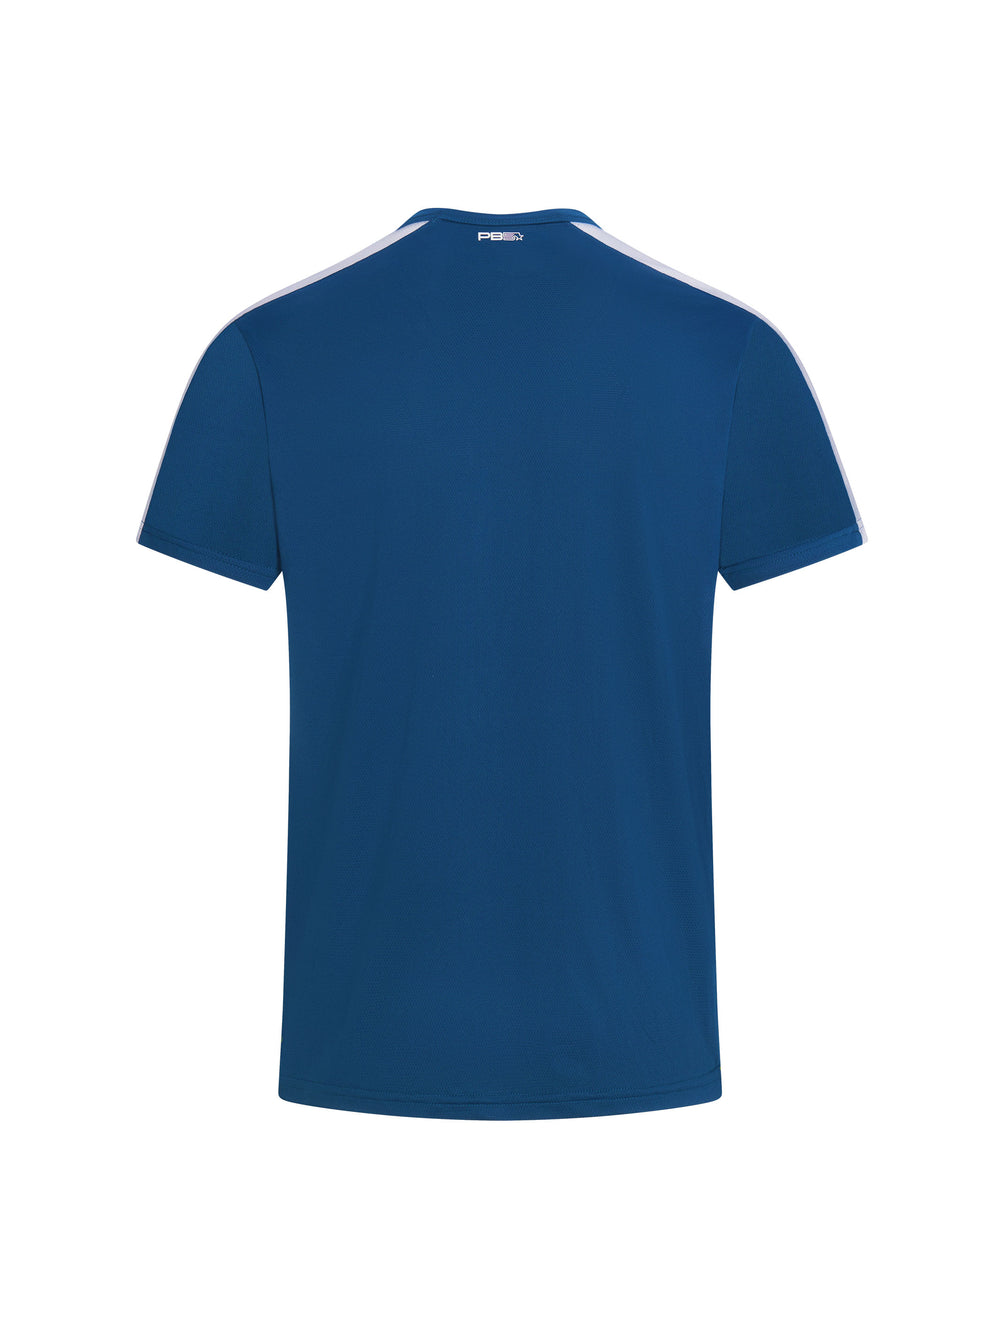 Men's Core Vented Tee back view in astral blue. Small logo printed on upper back just below crew neck seam.